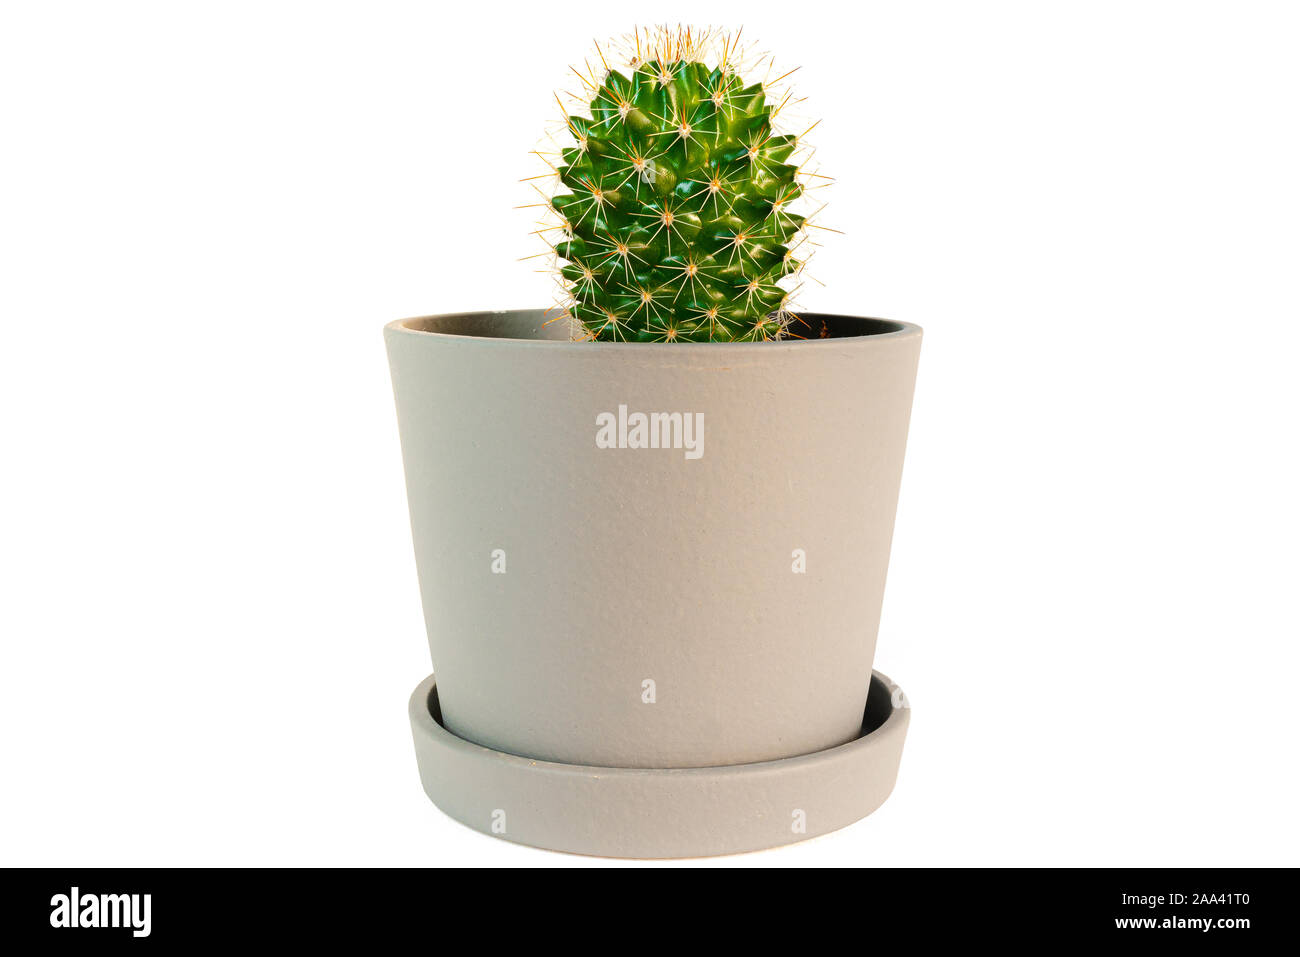 small potted cactus plant isolated on white background Stock Photo